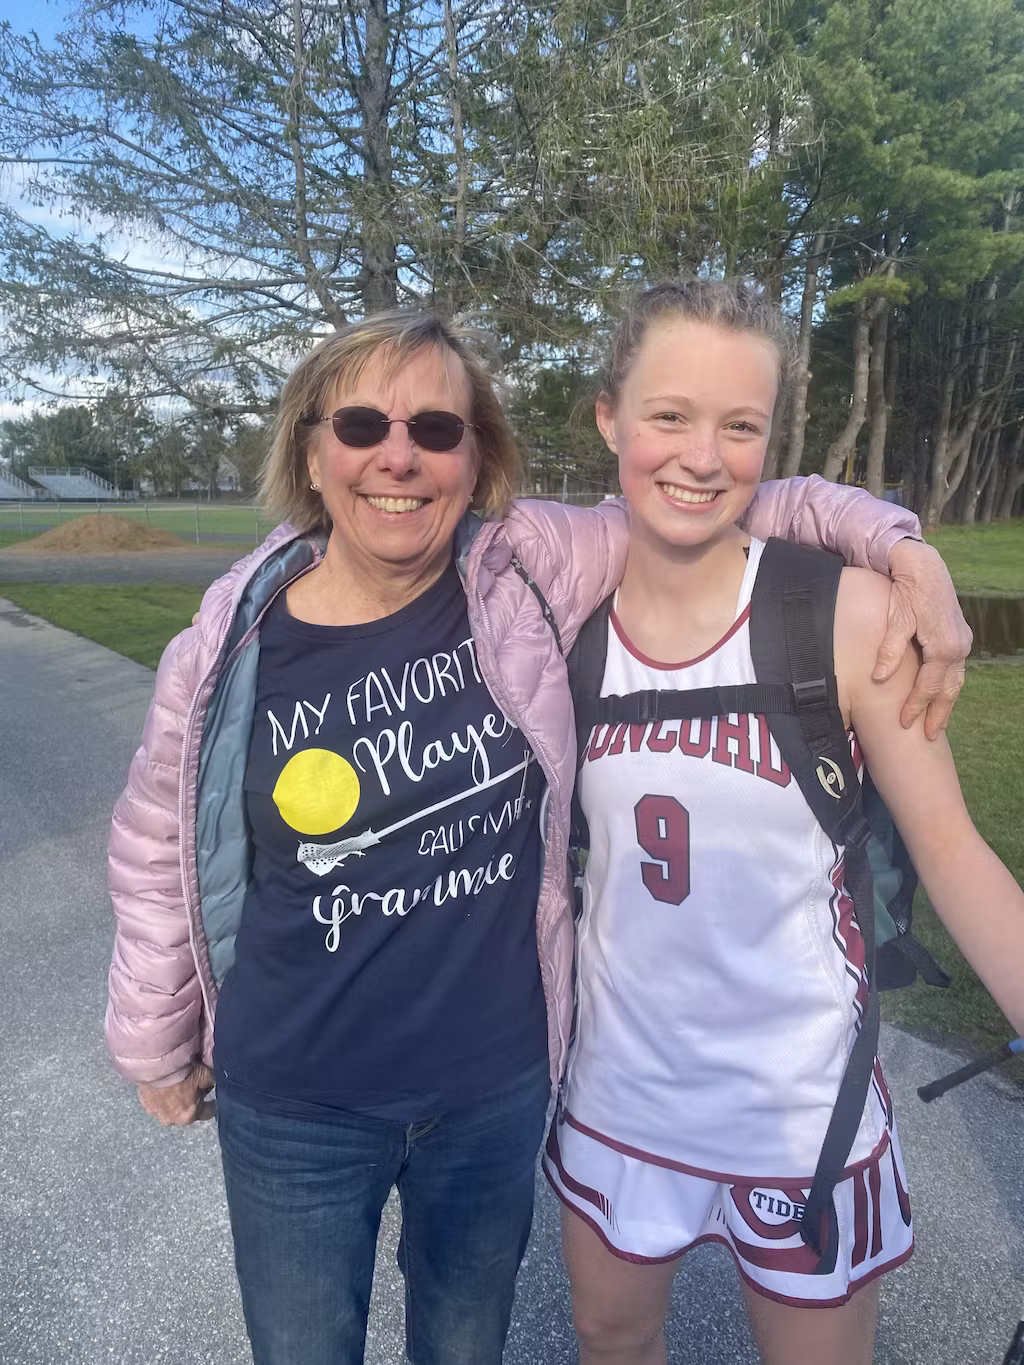 2._EDITH_PERKINS_-_Game_shirt_-_I_love_my_game_shirt_supporting_my_granddaughter_who_is_on_a_varsity_lacrosse_team_She_loves_it_too_I_wear_it_to_all_her_games - Suzitee Store